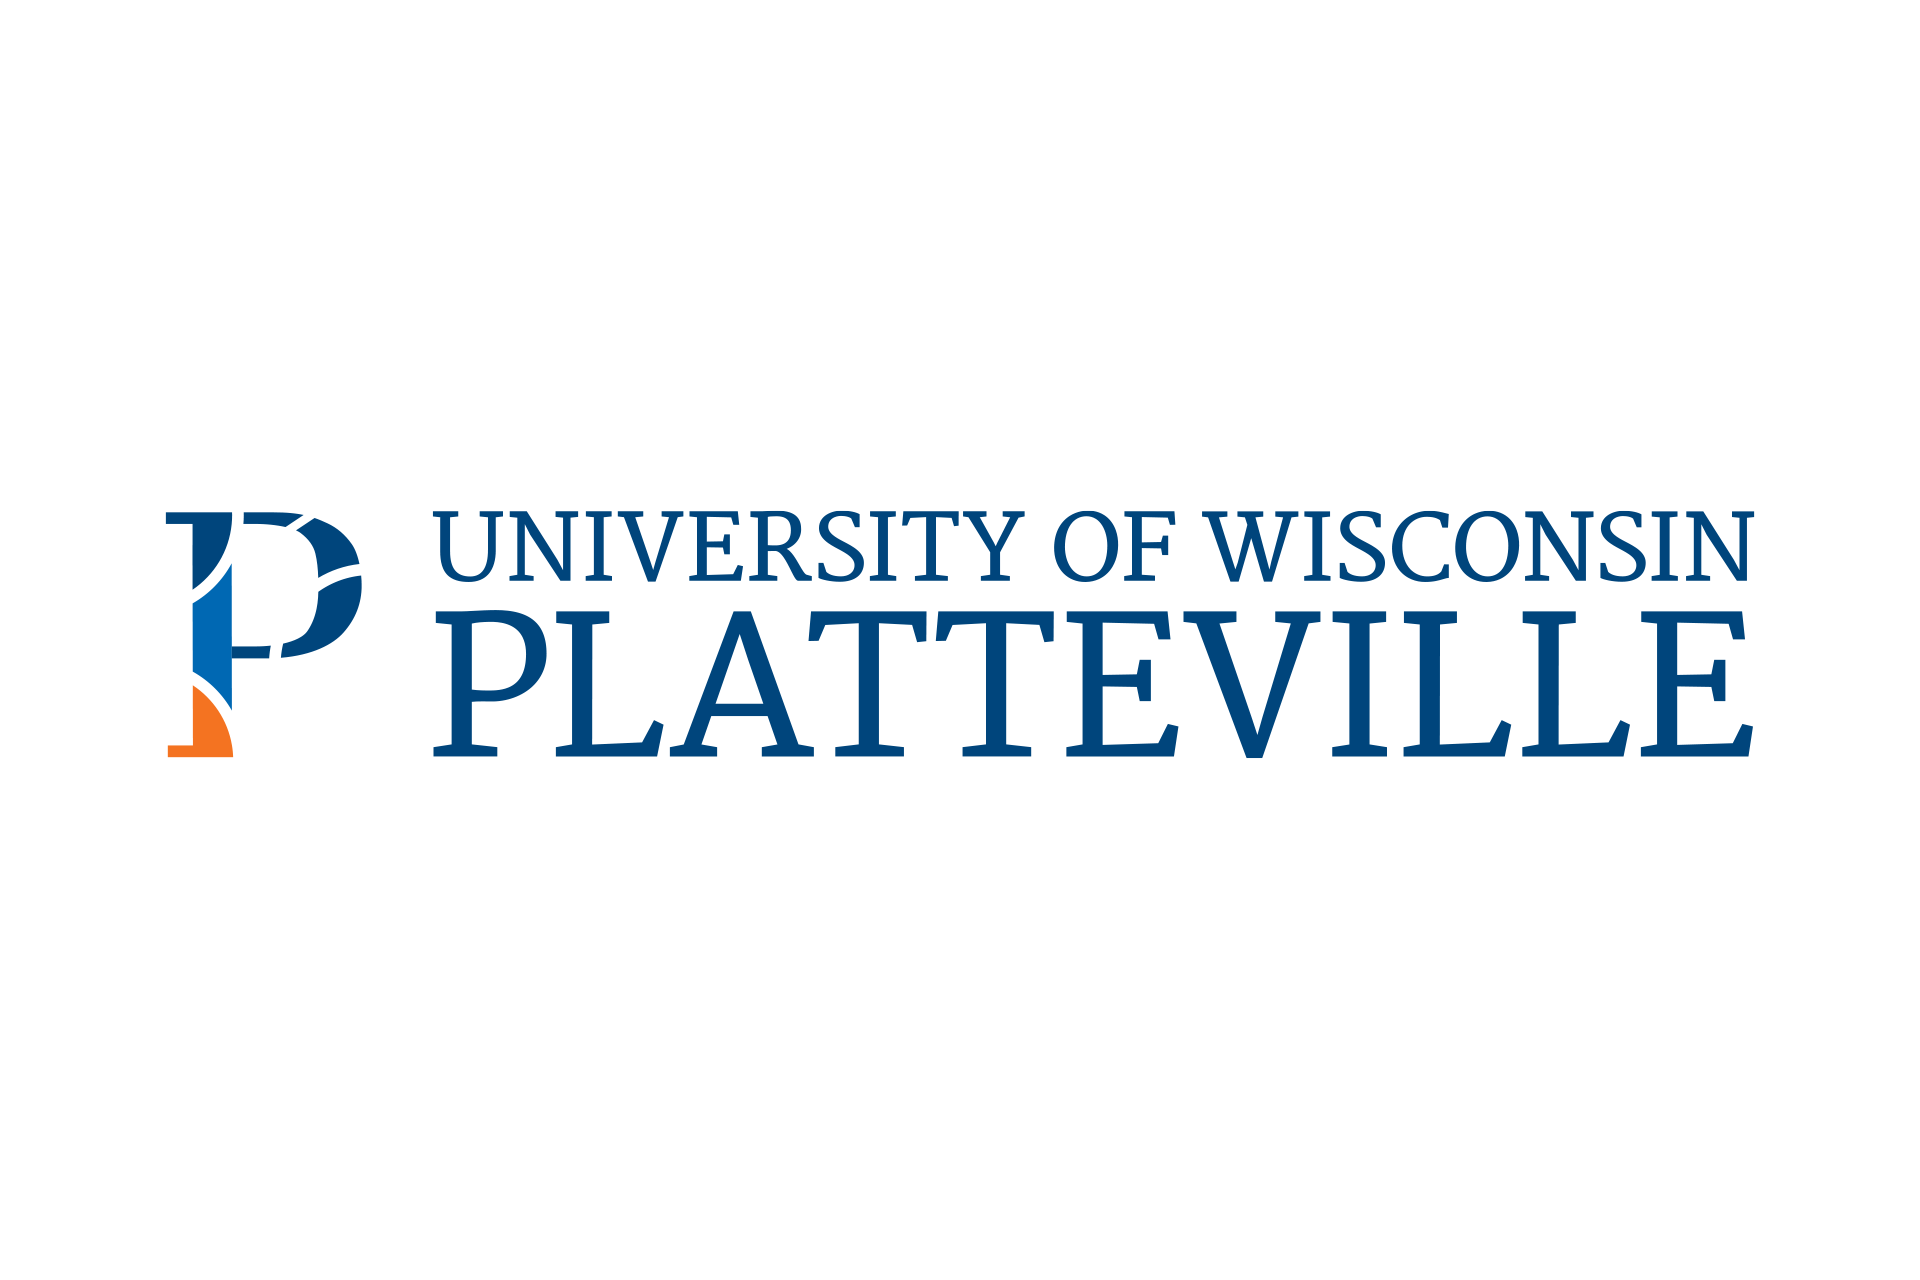 University of Wisconsin-Platteville’s four-color logo created by Vendi Advertising